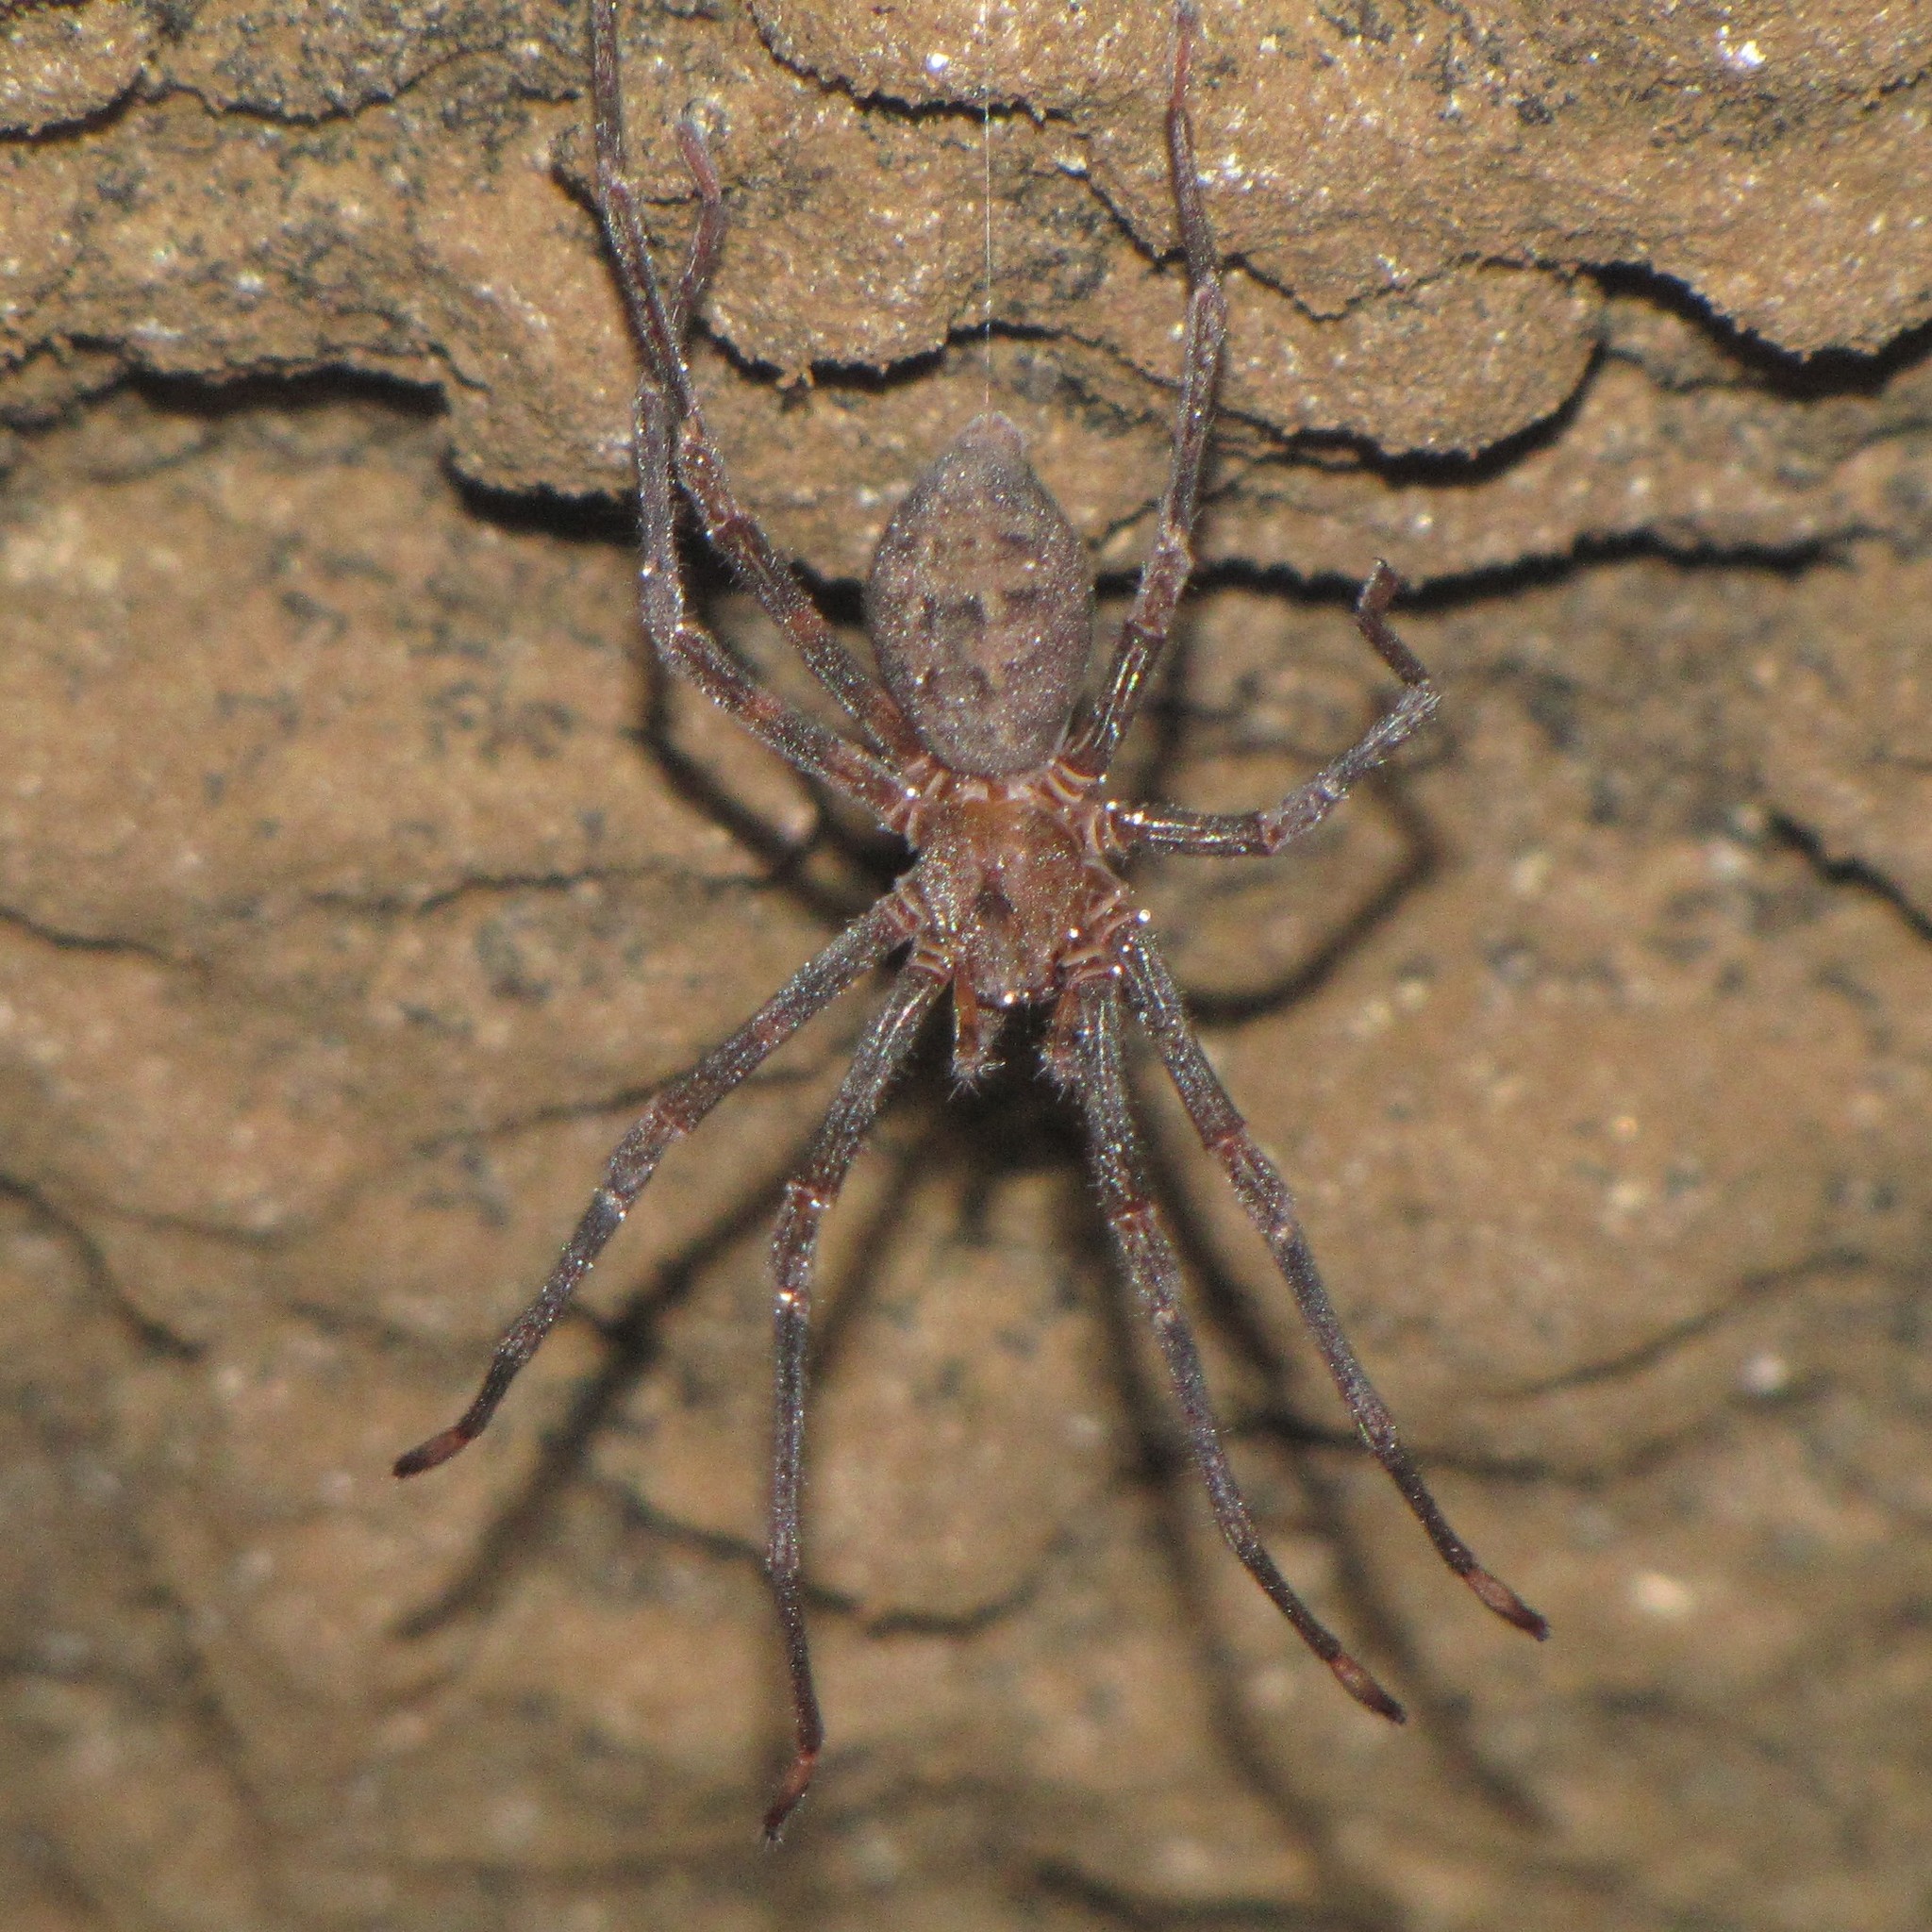 Nelson cave spider. Image credit: Courtesy of Hovmoller, iNaturalist